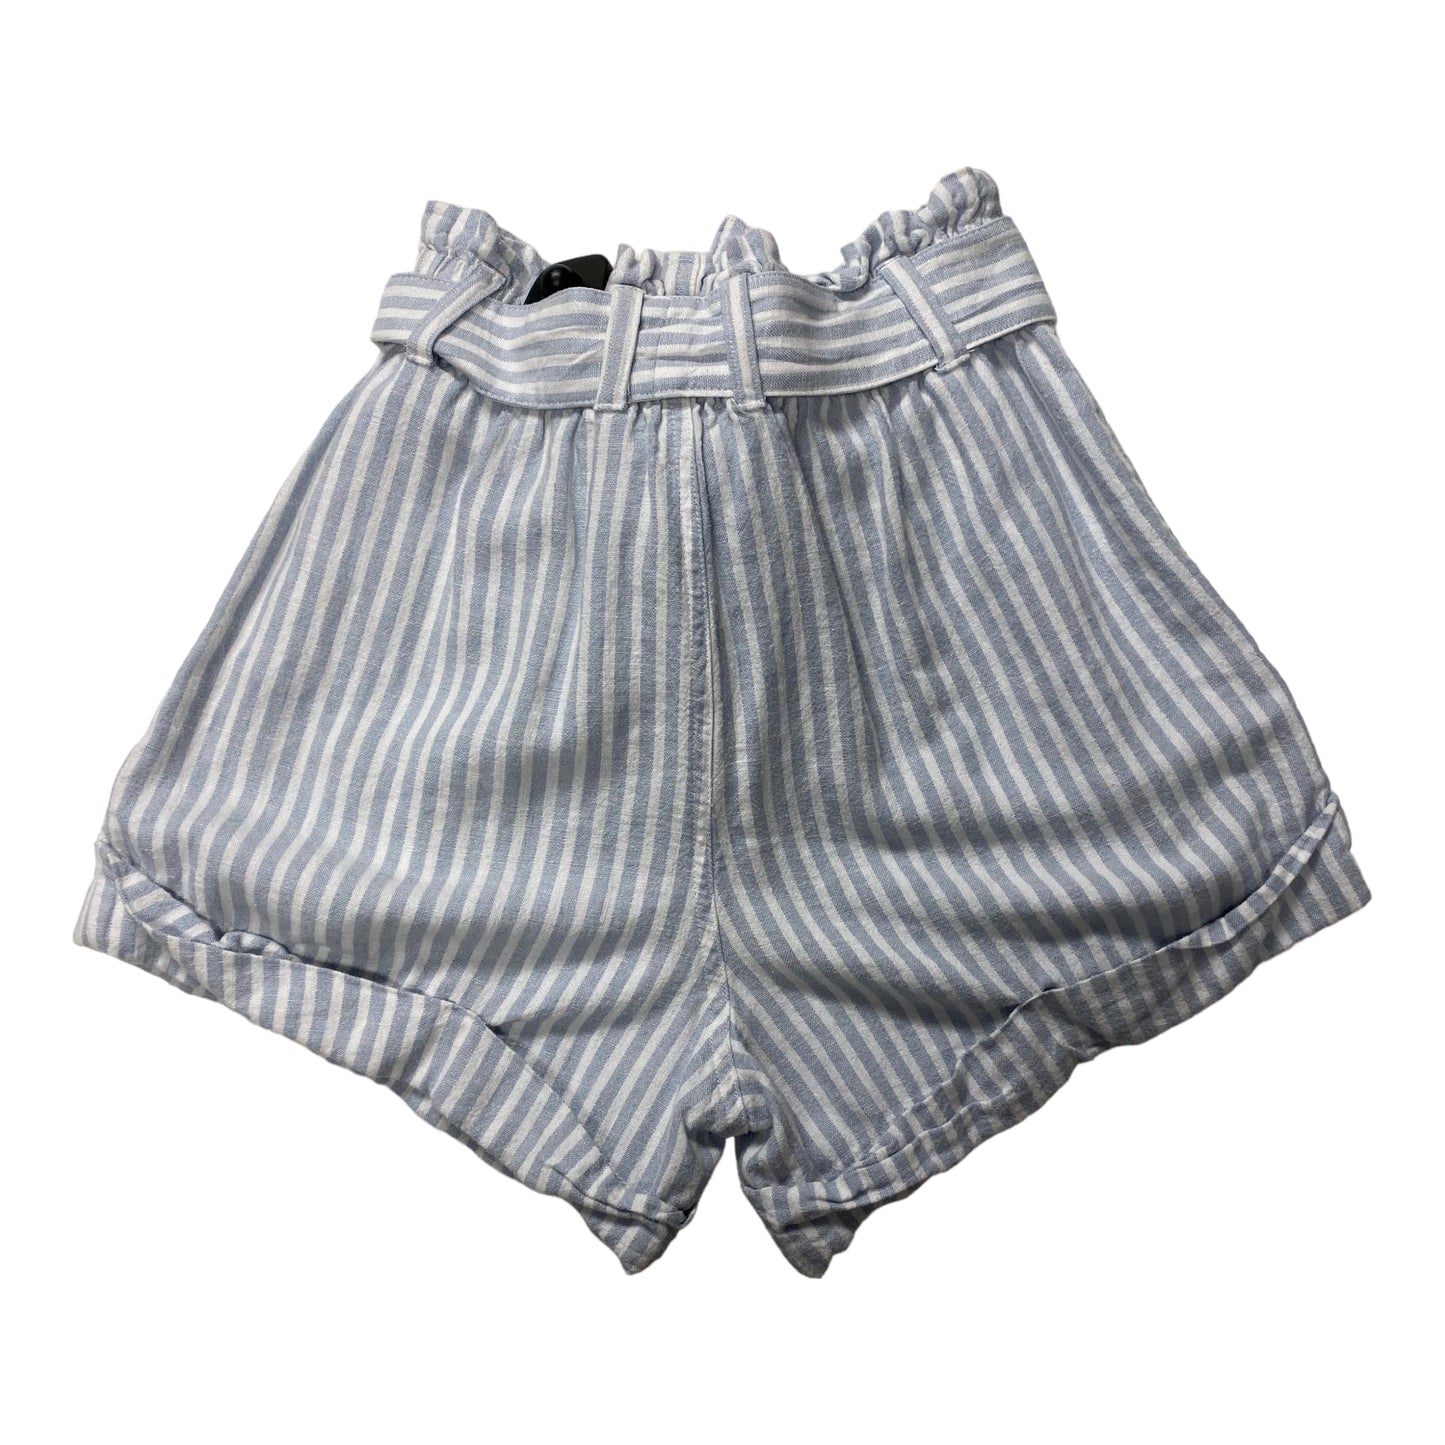 Blue Shorts Abercrombie And Fitch, Size S